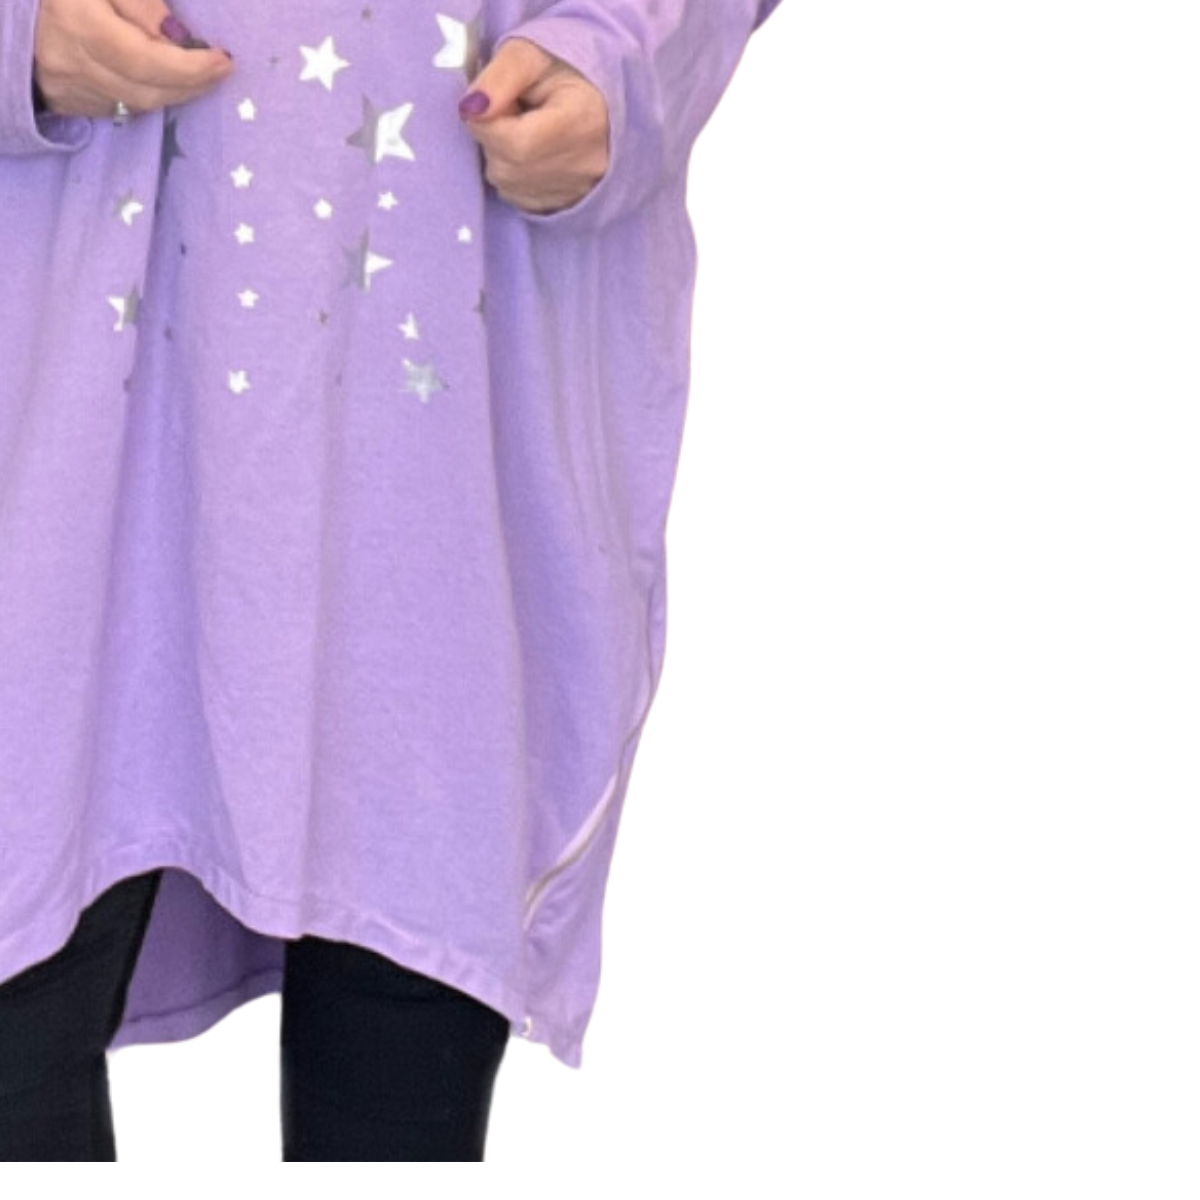 OVERSIZED LOOSE FITTING JUMPER DRESS / LONG TOP WITH SILVER STARS